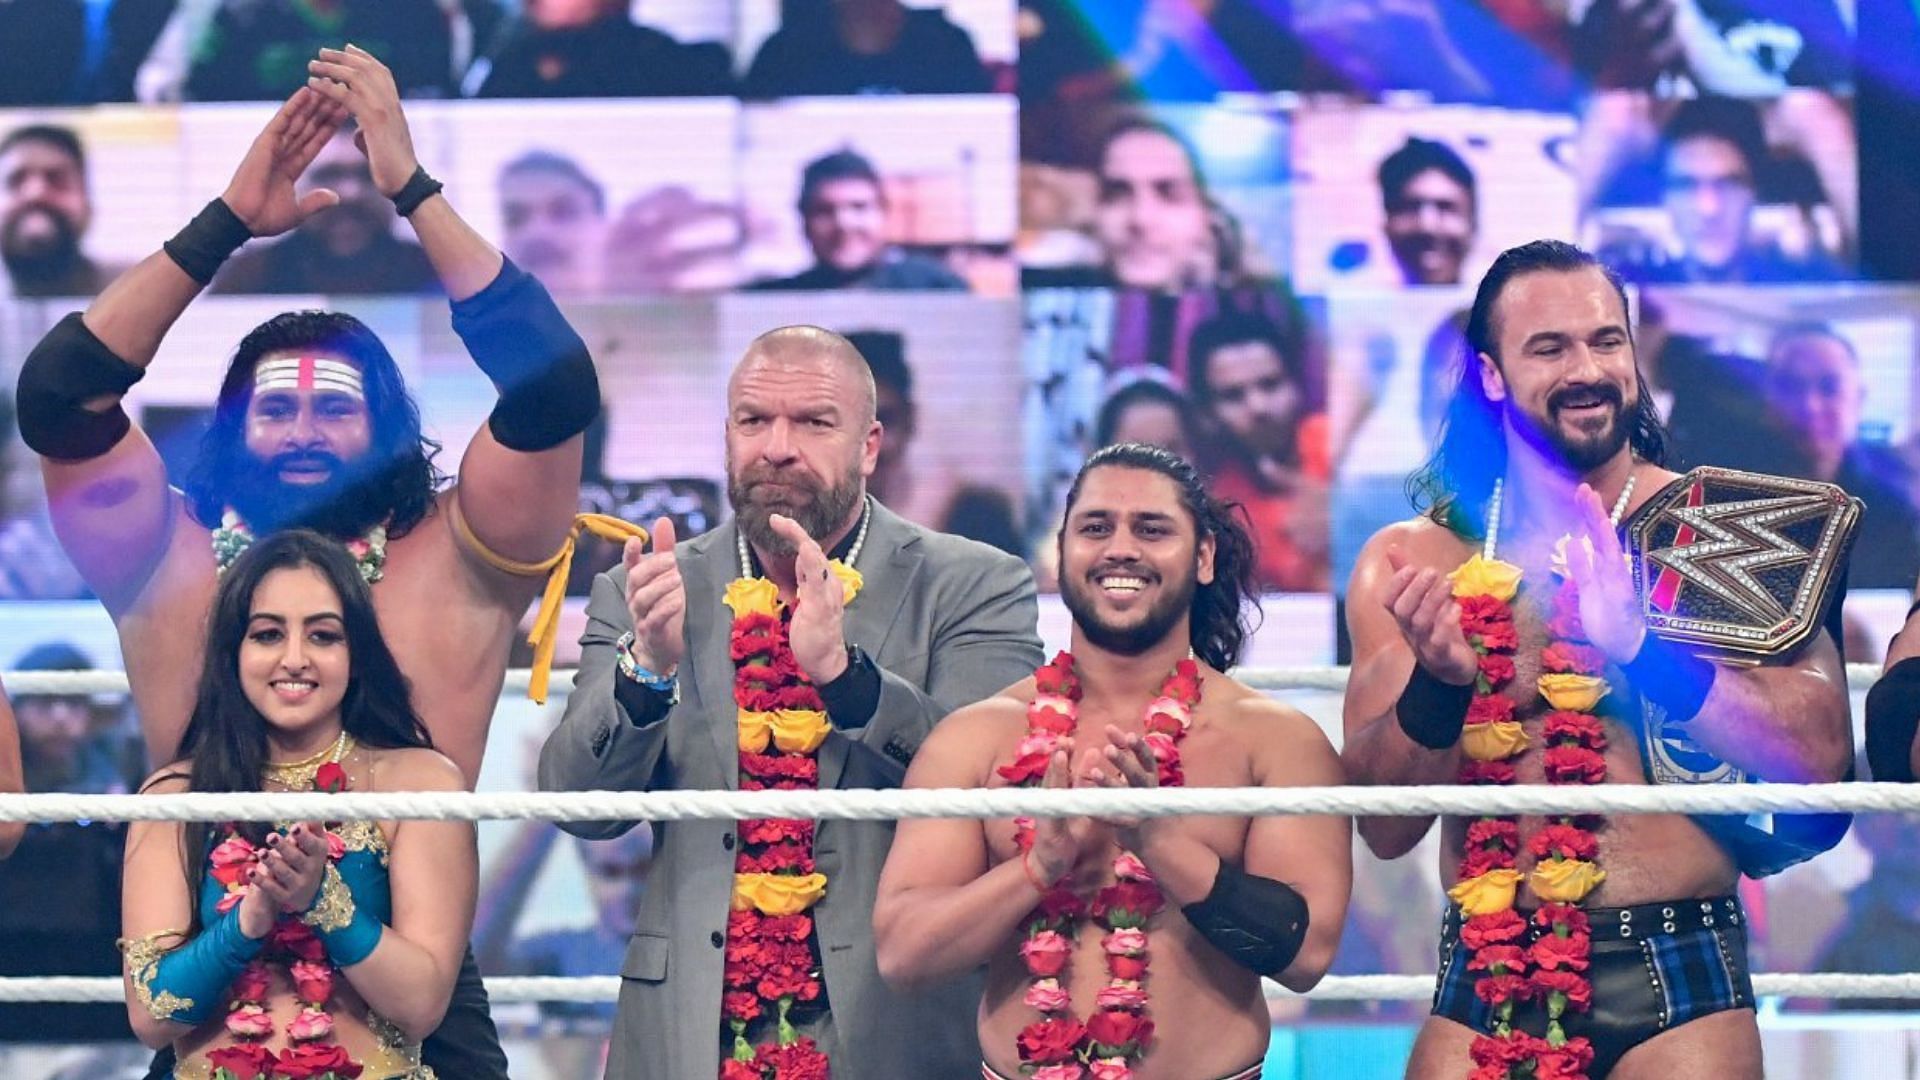 WWE has put on multiple shows in India before